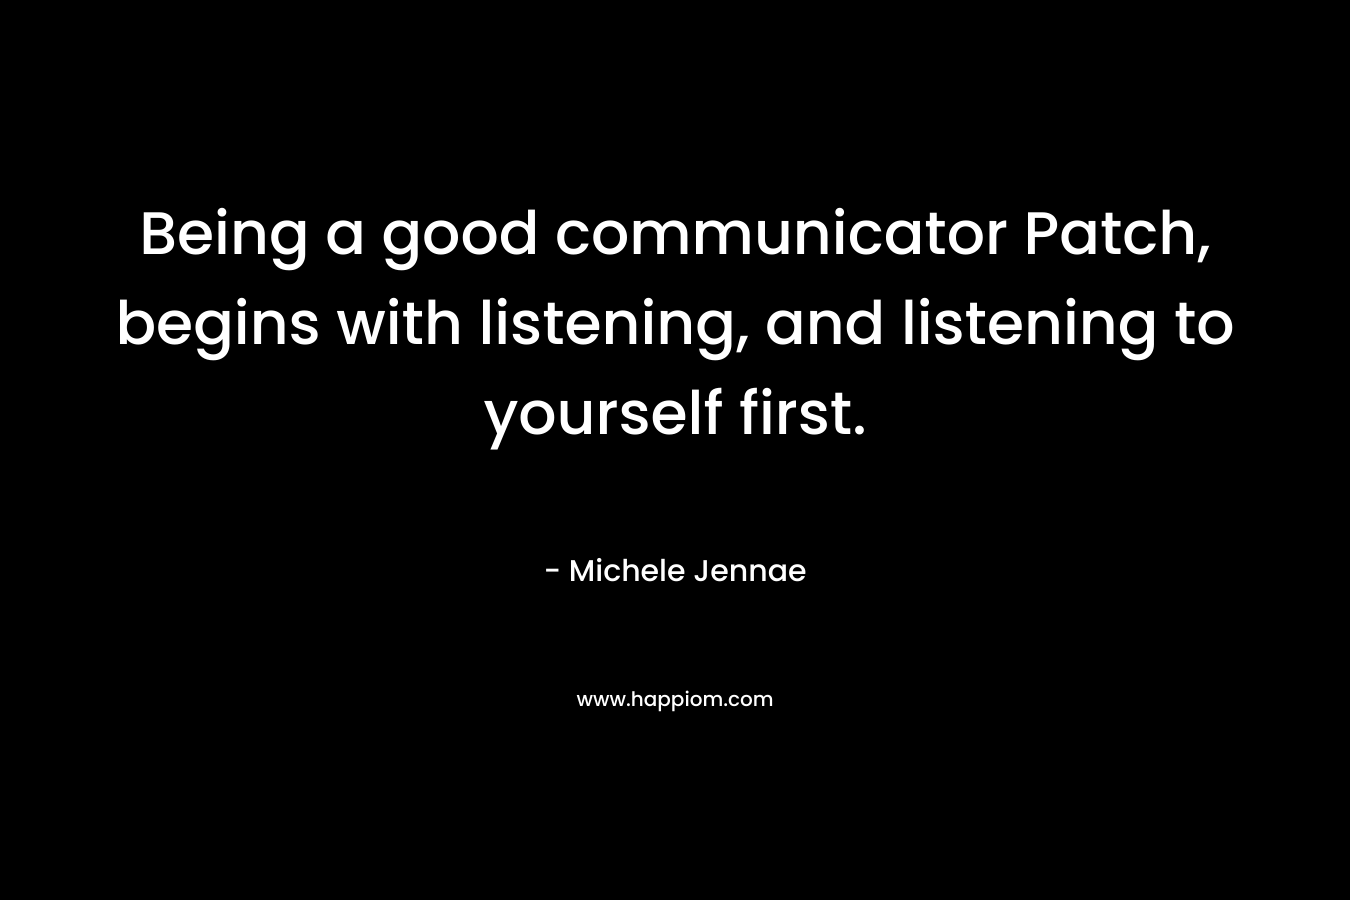 Being a good communicator Patch, begins with listening, and listening to yourself first.